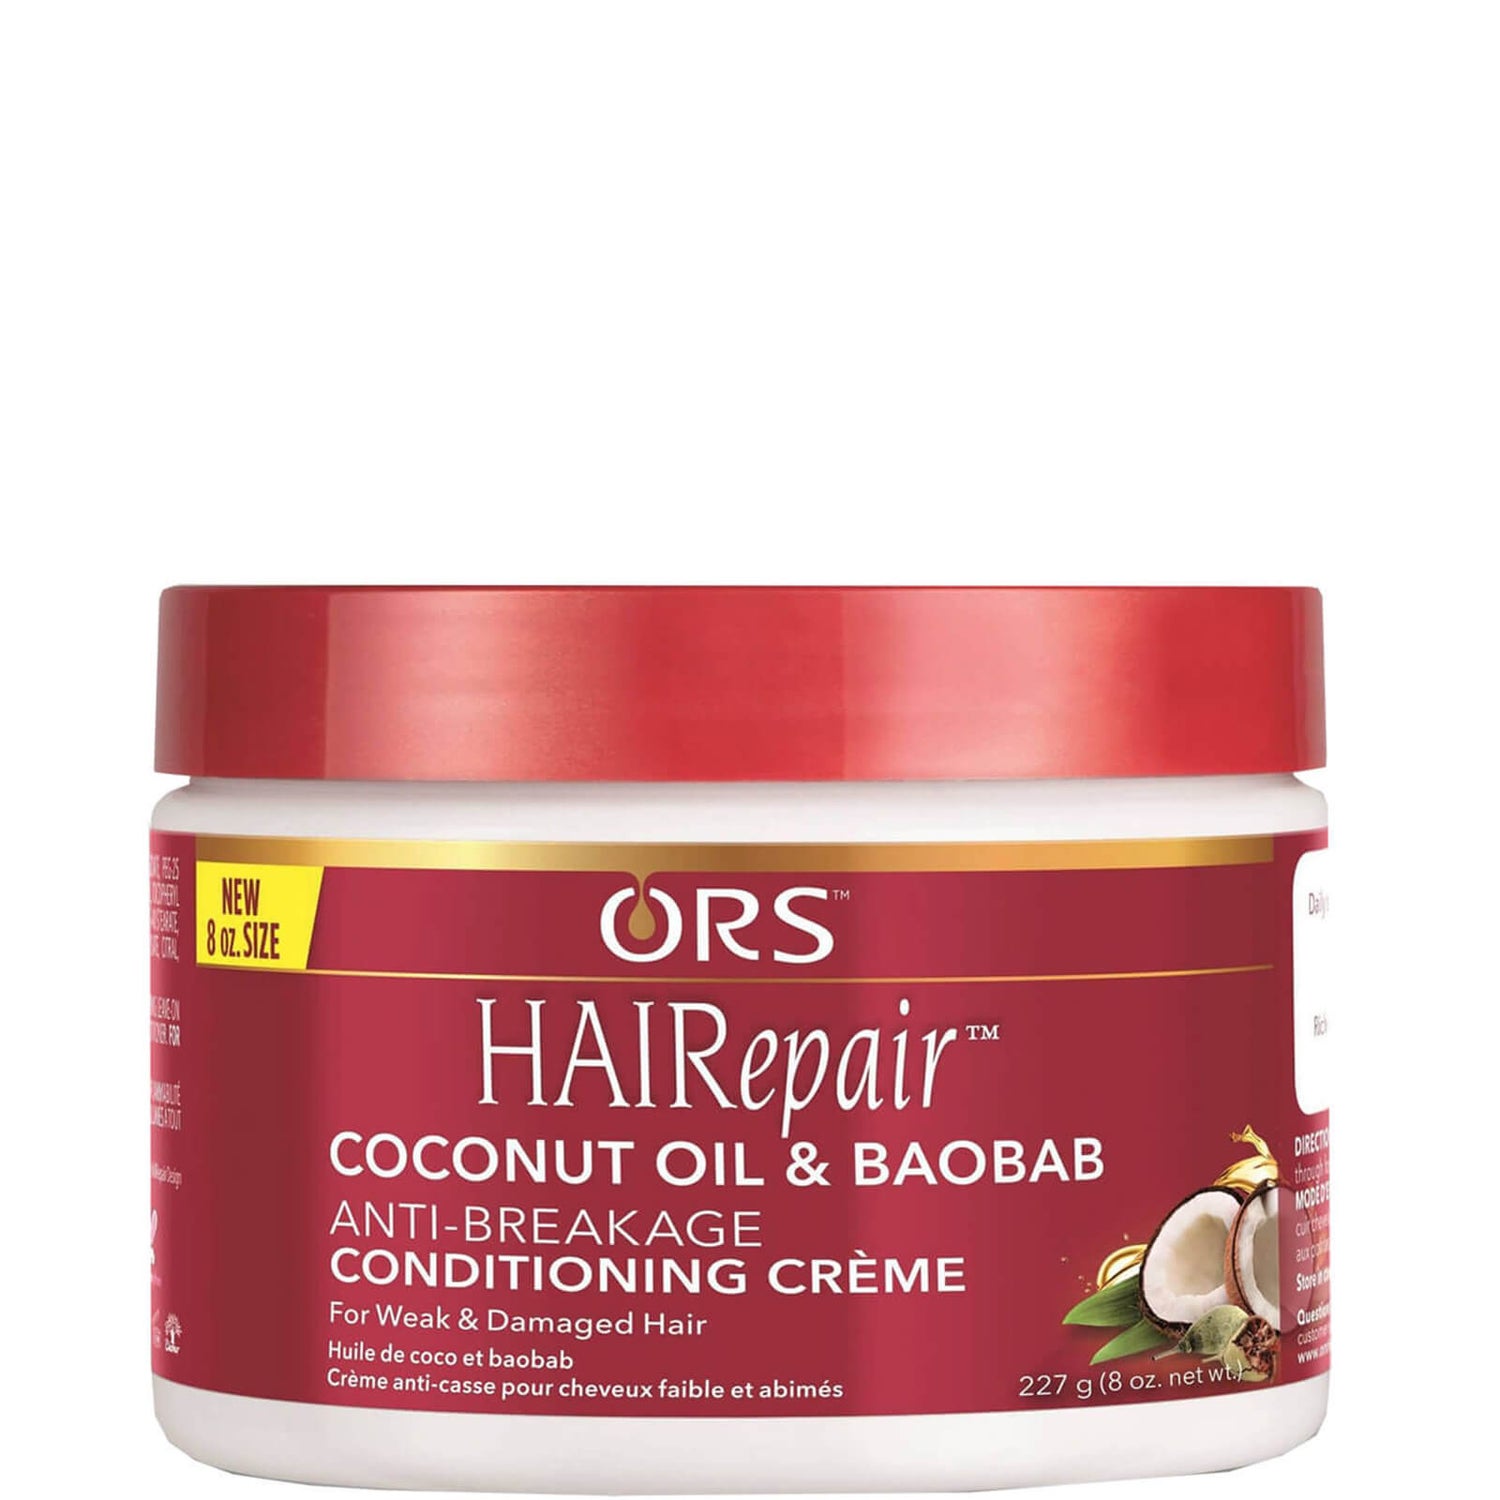 ORS HAIRepair Anti-Breakage Conditioning Crème 142g